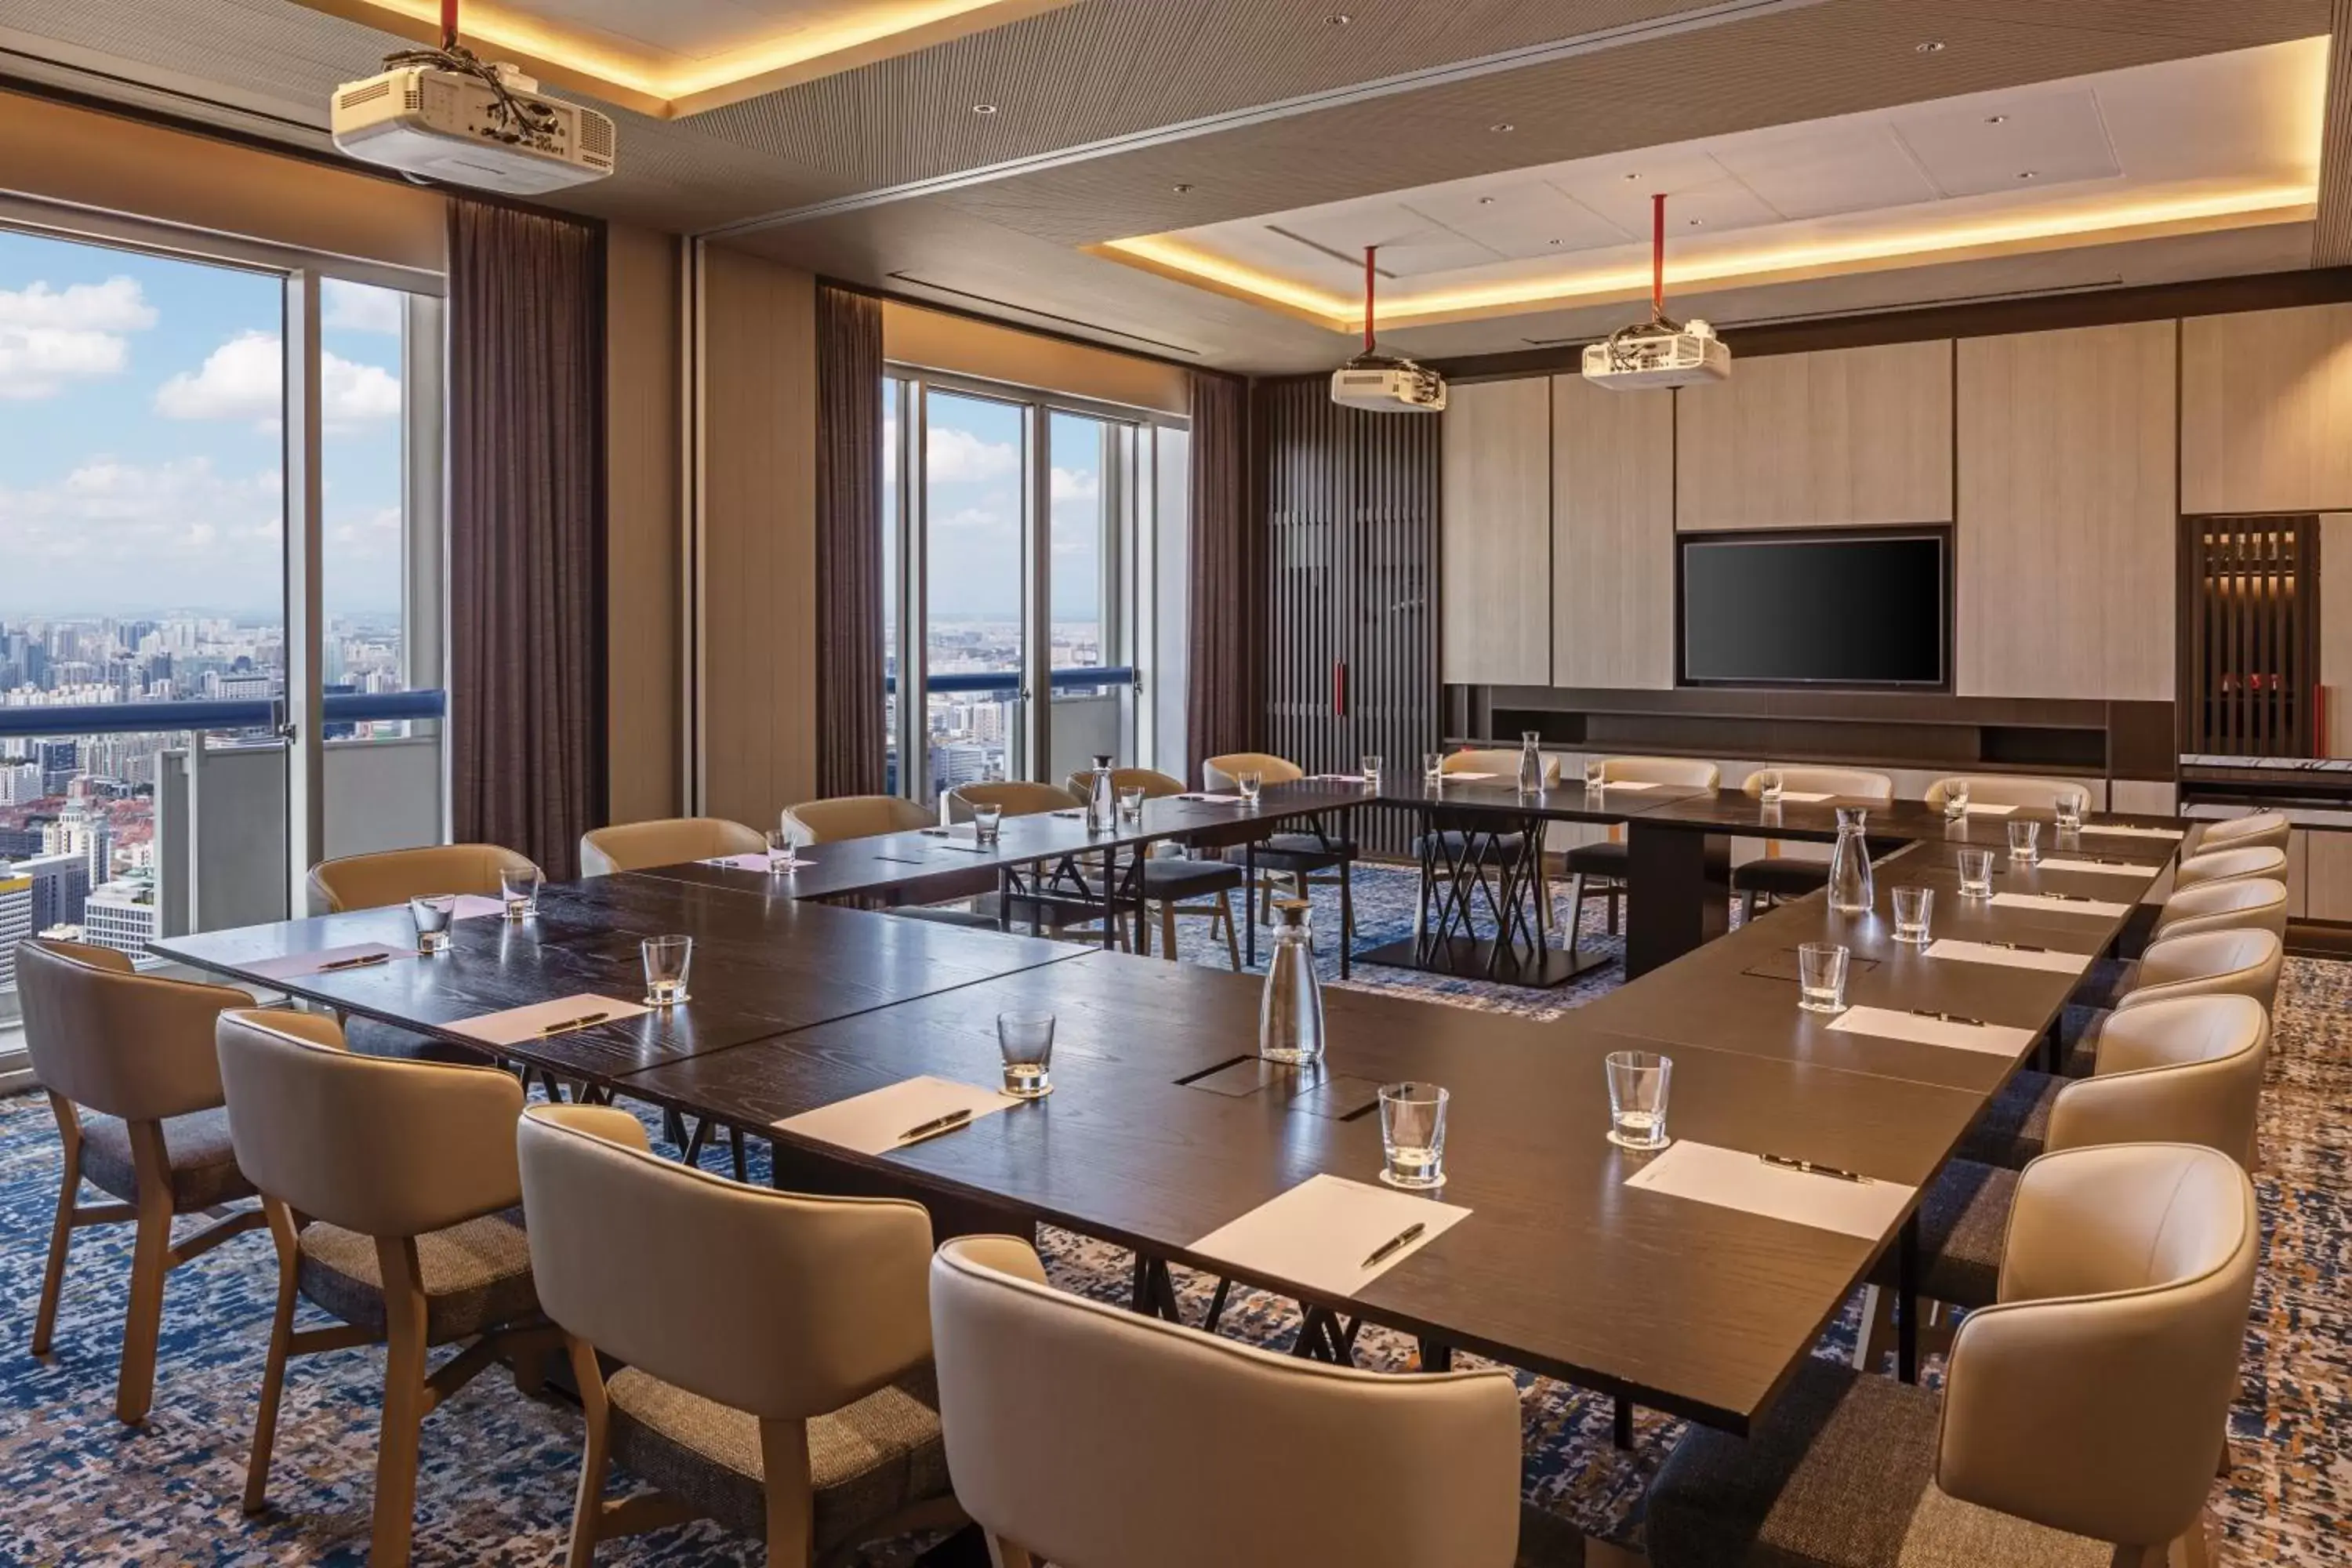 Meeting/conference room in Swissotel The Stamford